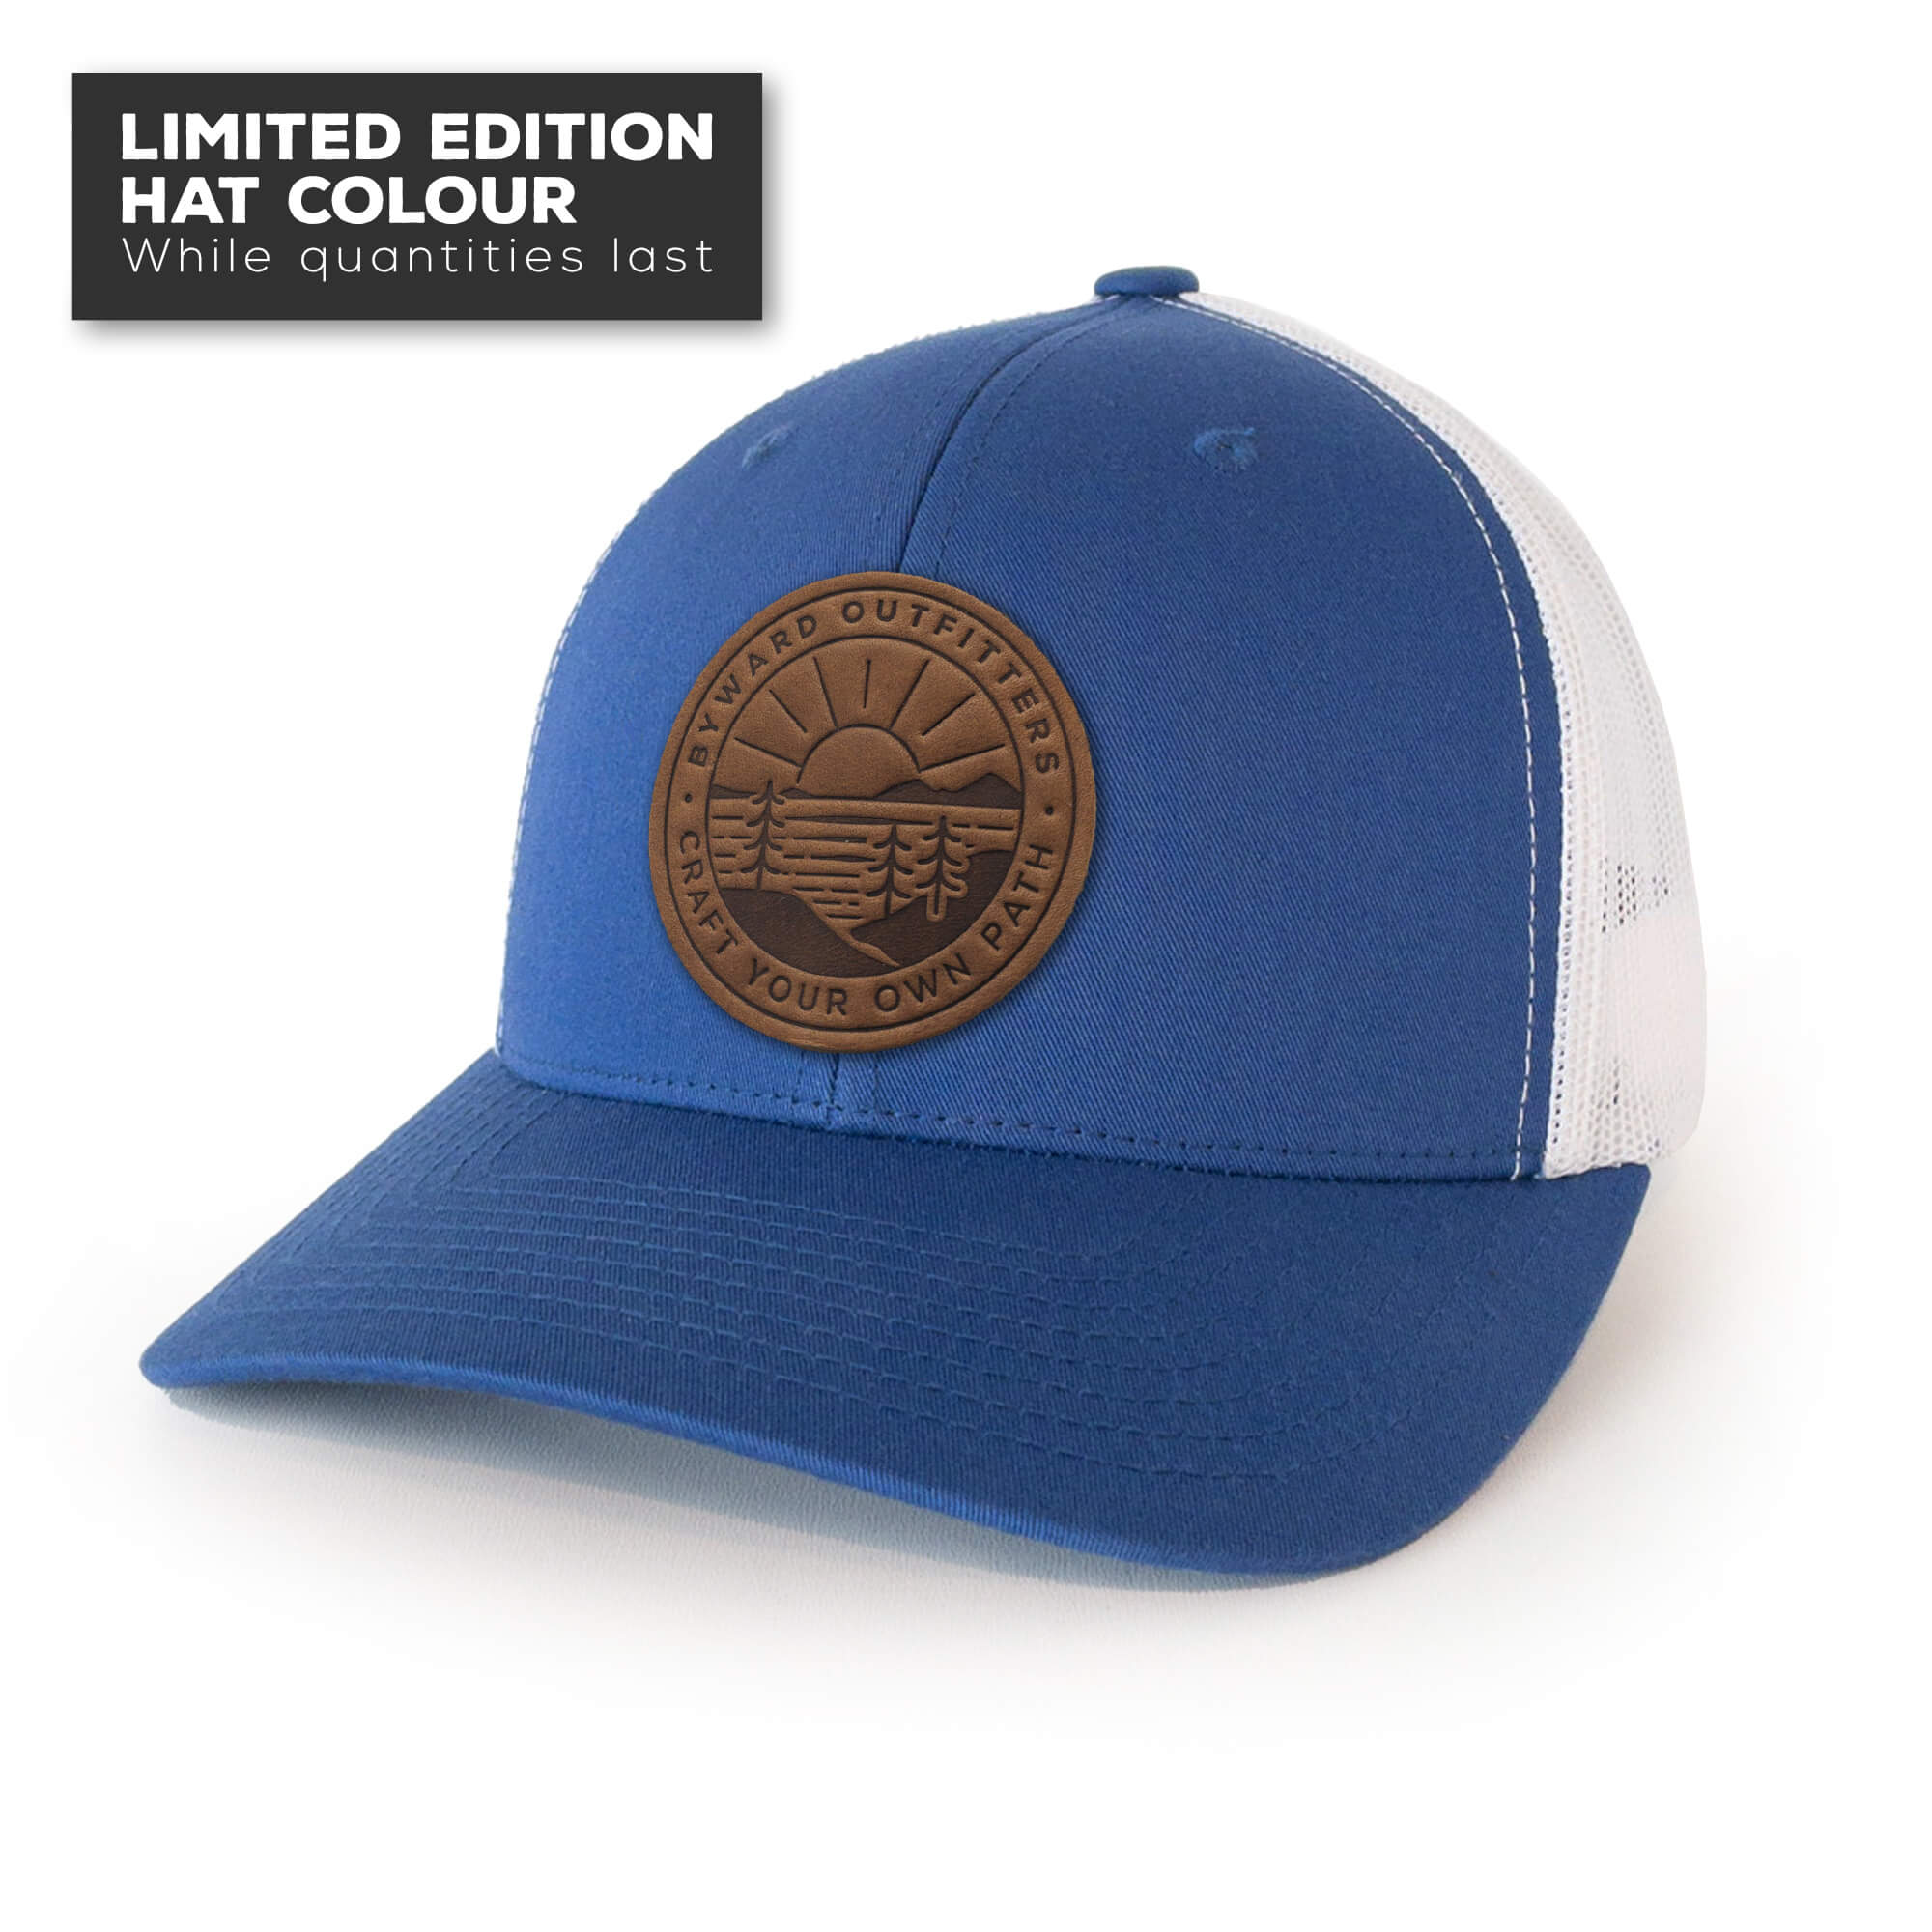 Royal Blue trucker hat with full-grain leather patch of Scenic Sunrise